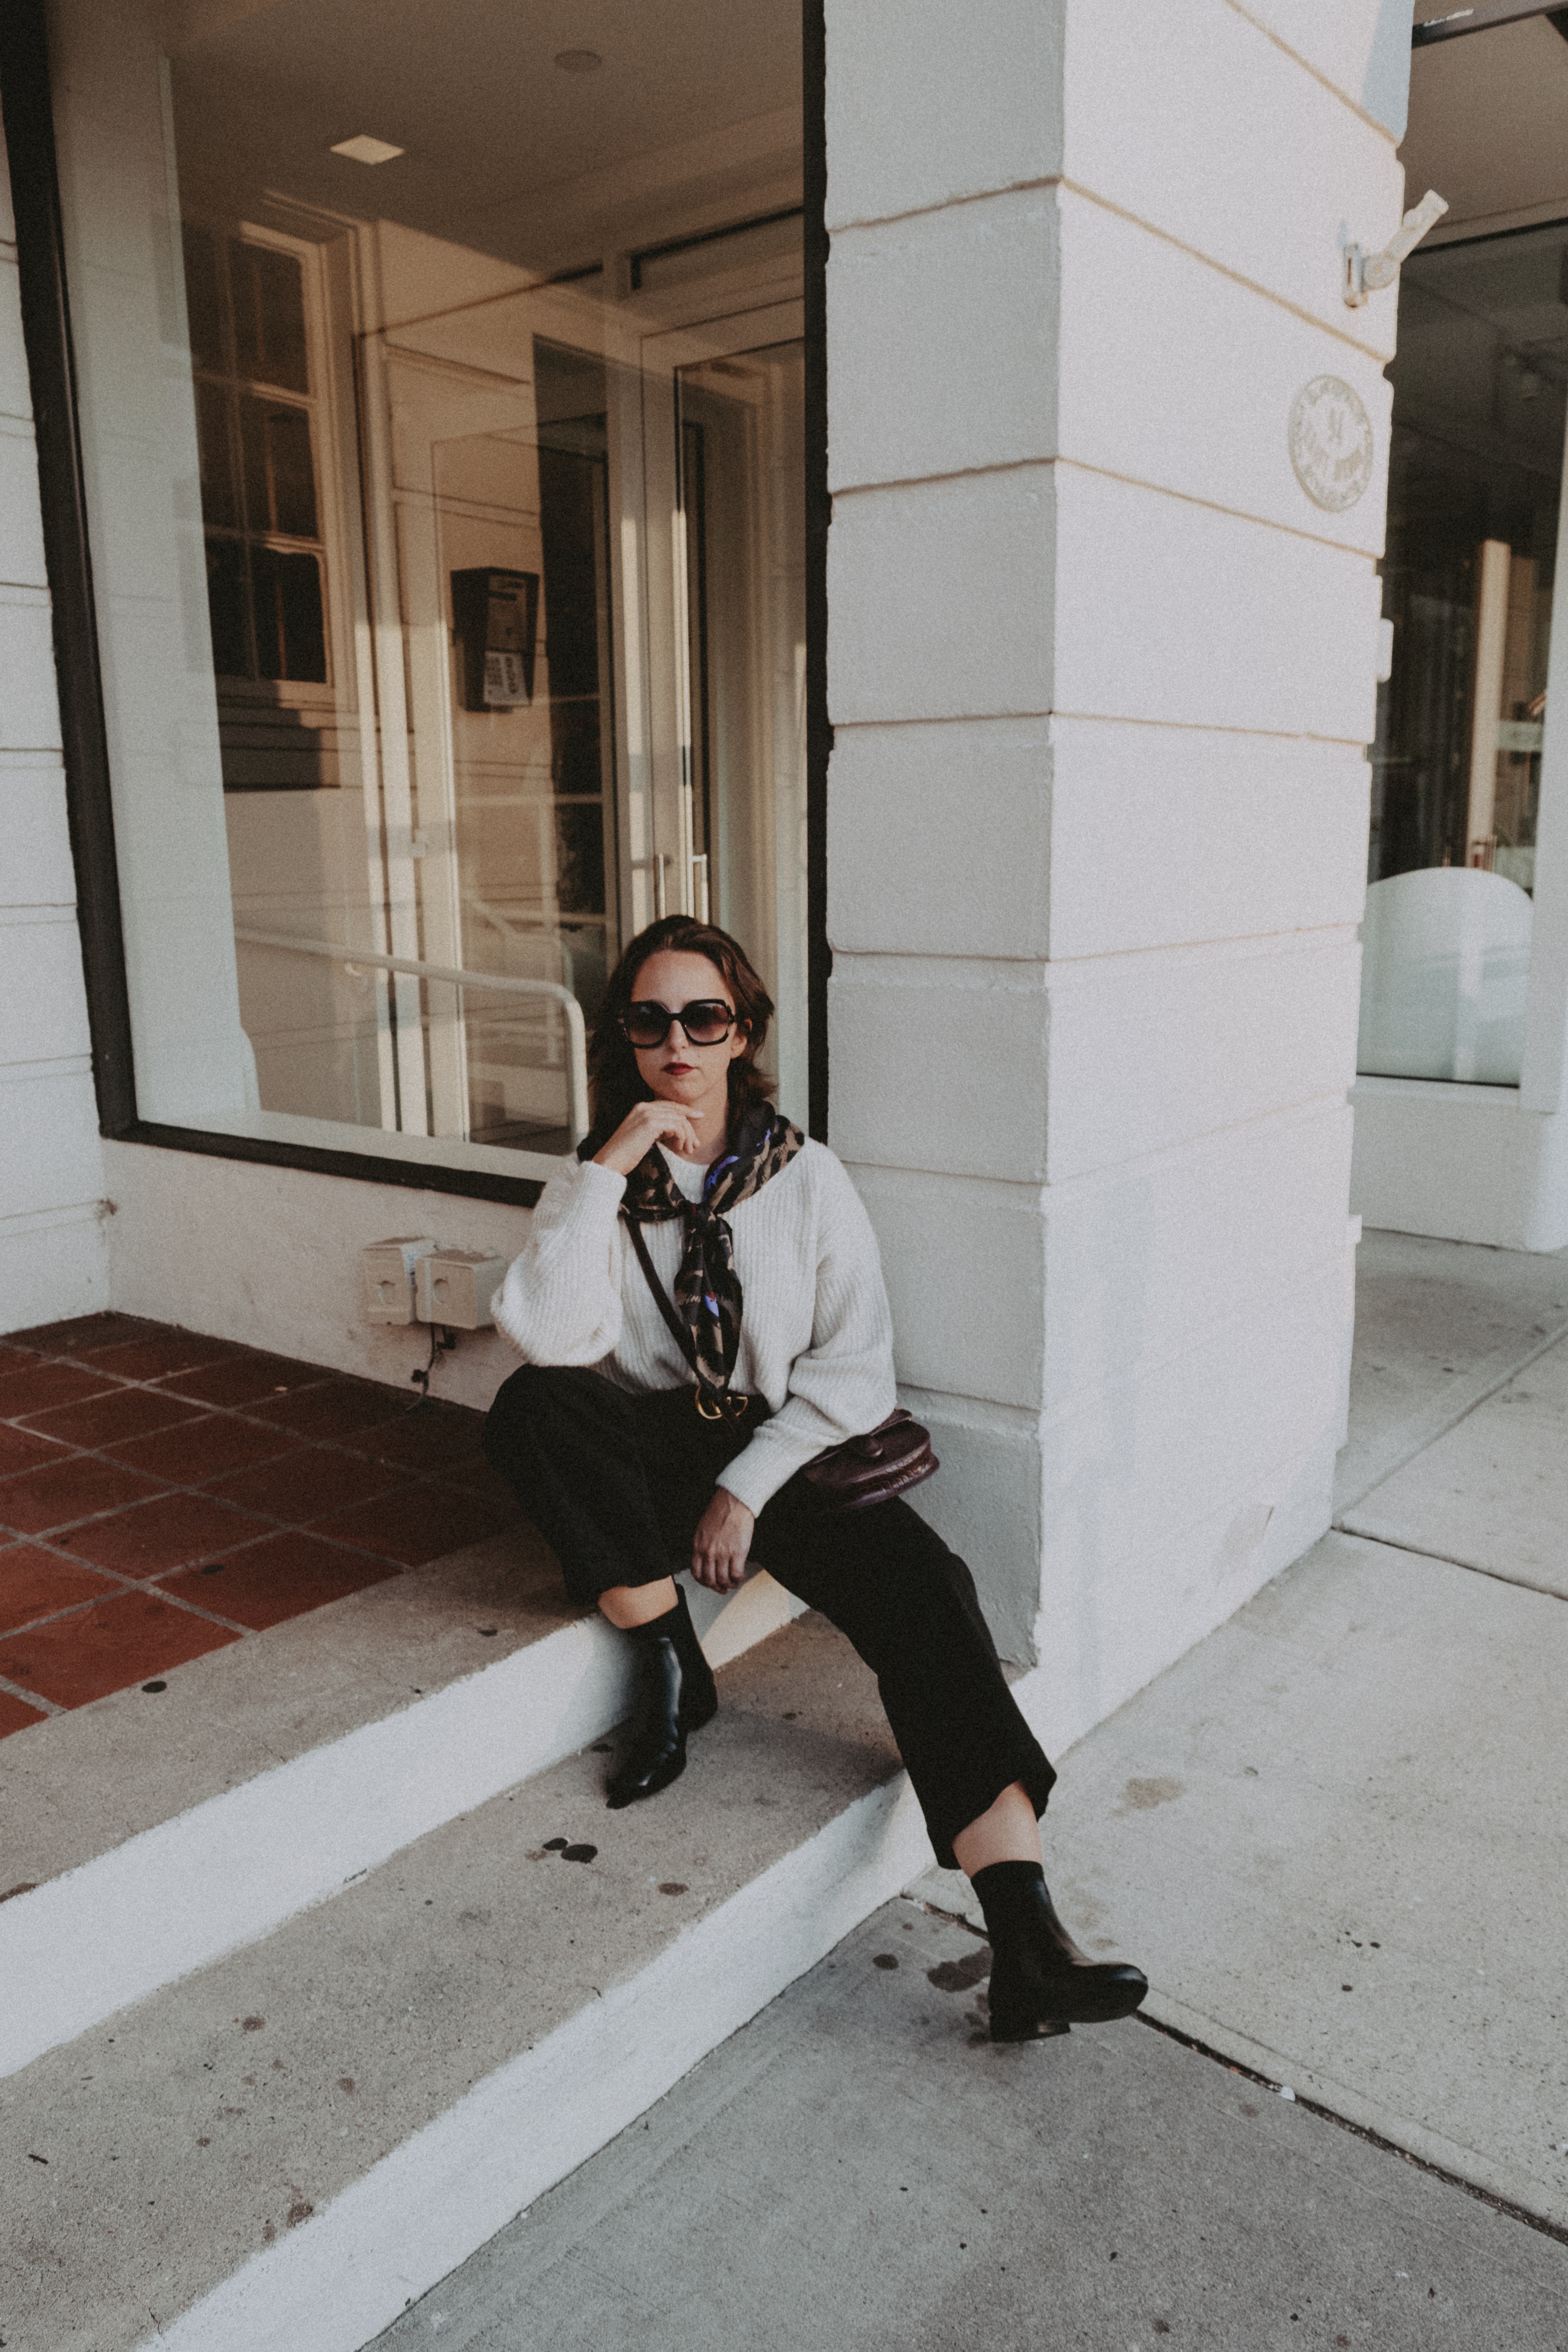 3 Easy Fashionable Ways To Be A More Ethical Consumer - everlane - dvf - bloomingdales - fall fashion - street style #everlane #fall #fallfashion #falloutfit #fallstyle #ethicalfashion #fashion #outfit #style #boots #streetstyle Simone Piliero - Simply by Simone #sitting